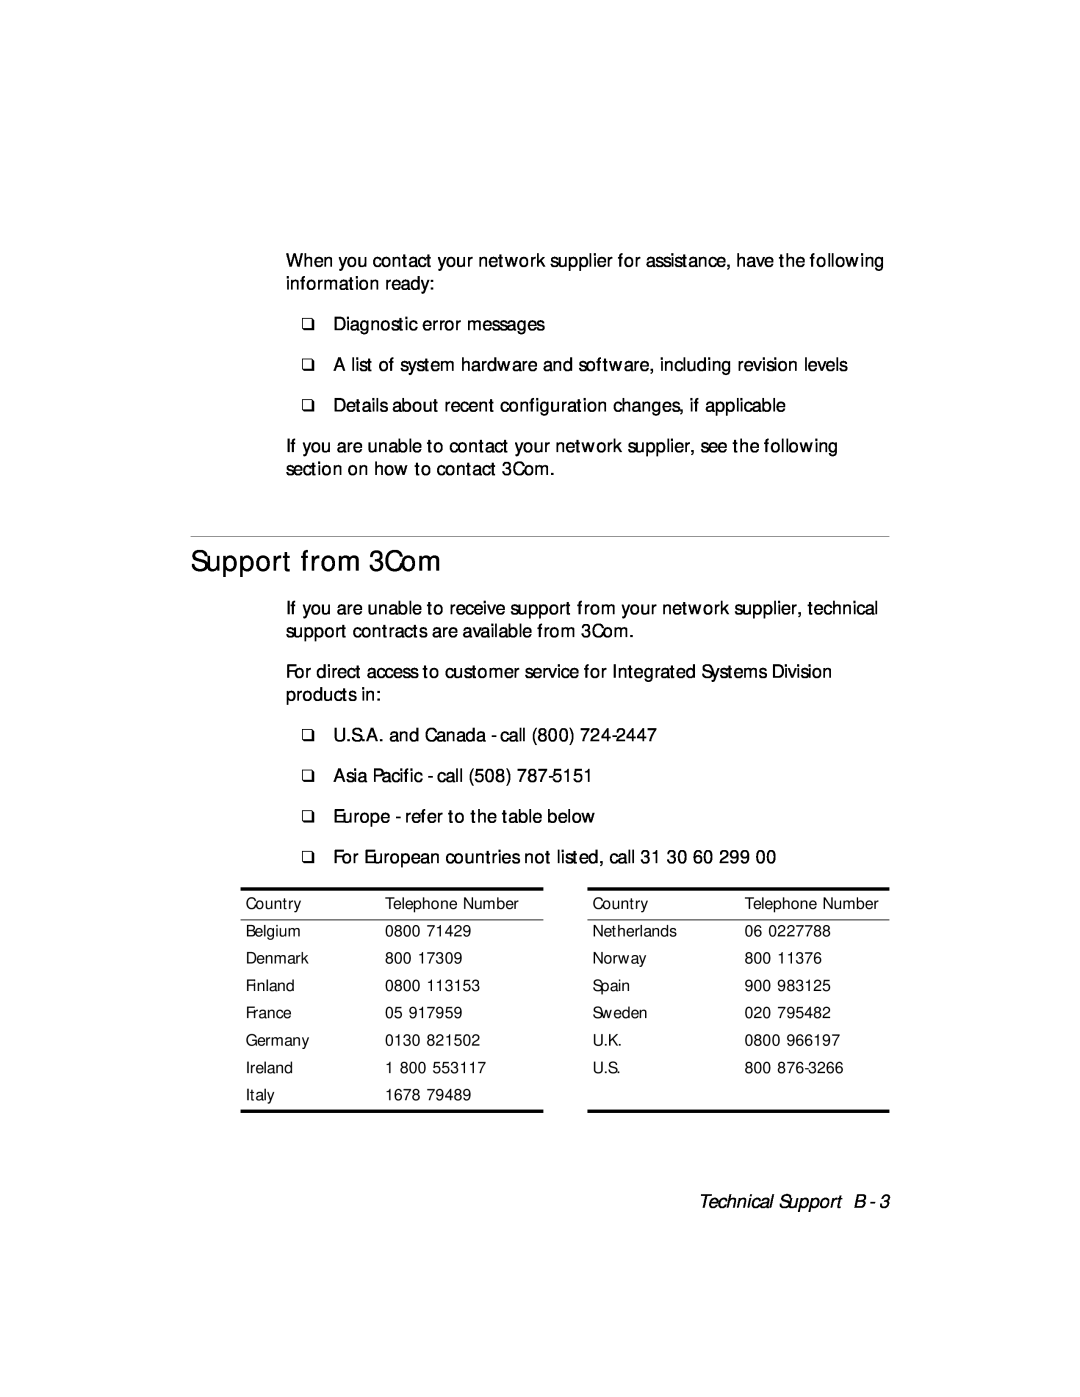 3Com 5124M-TPCL manual Support from 3Com, Technical Support B 